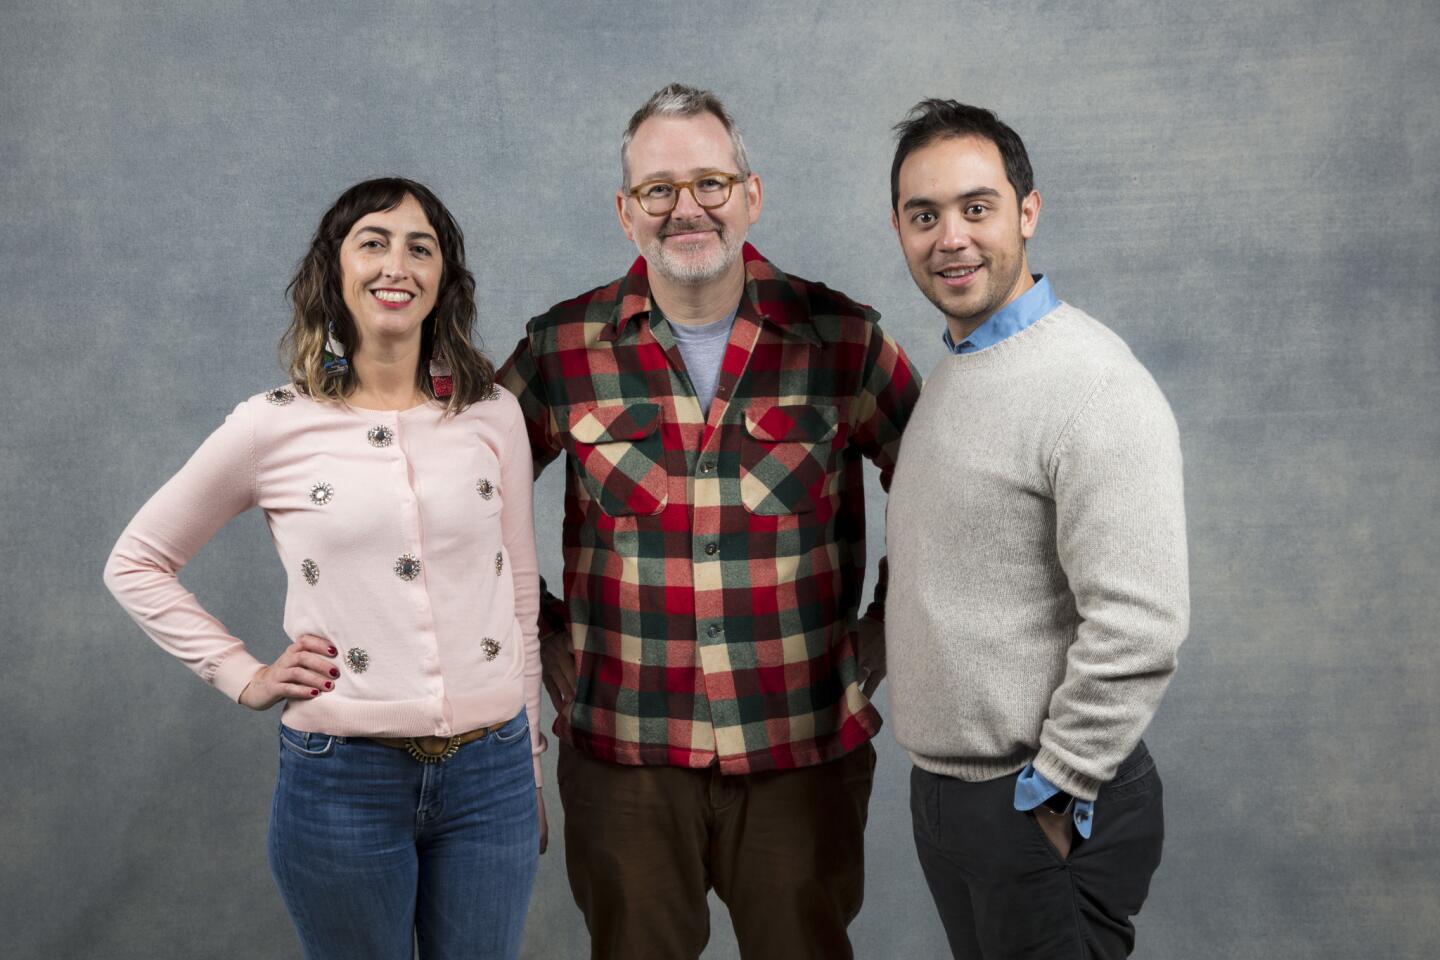 Producer Caryn Capotosto, director Morgan Neville, and producer Nicholas Ma, from the film, "Won't You Be My Neighbor?," photographed in the L.A. Times Studio at Chase Sapphire on Main, during the Sundance Film Festival in Park City, Utah, Jan. 21, 2018.